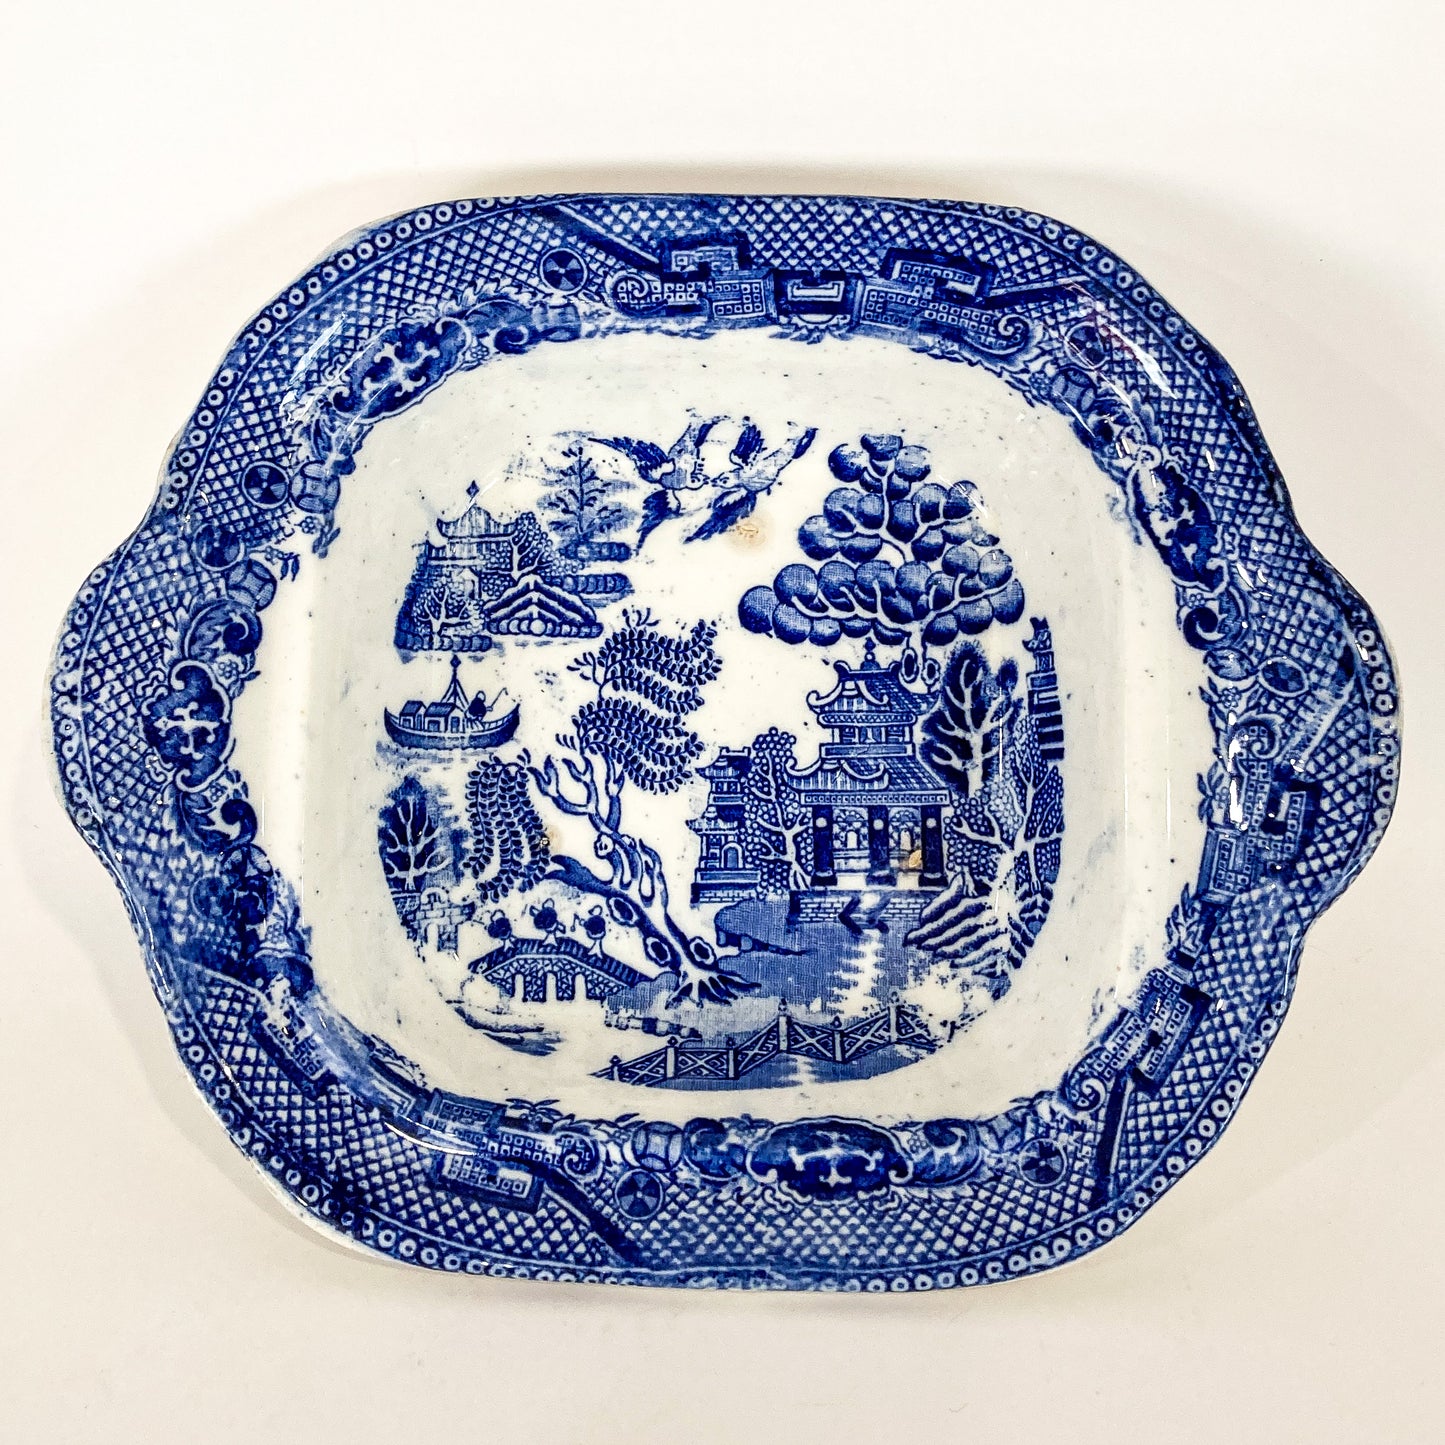 Antique Warranted Staffordshire Blue Willow Covered Porcelain Vegetable Bowl Top Dish